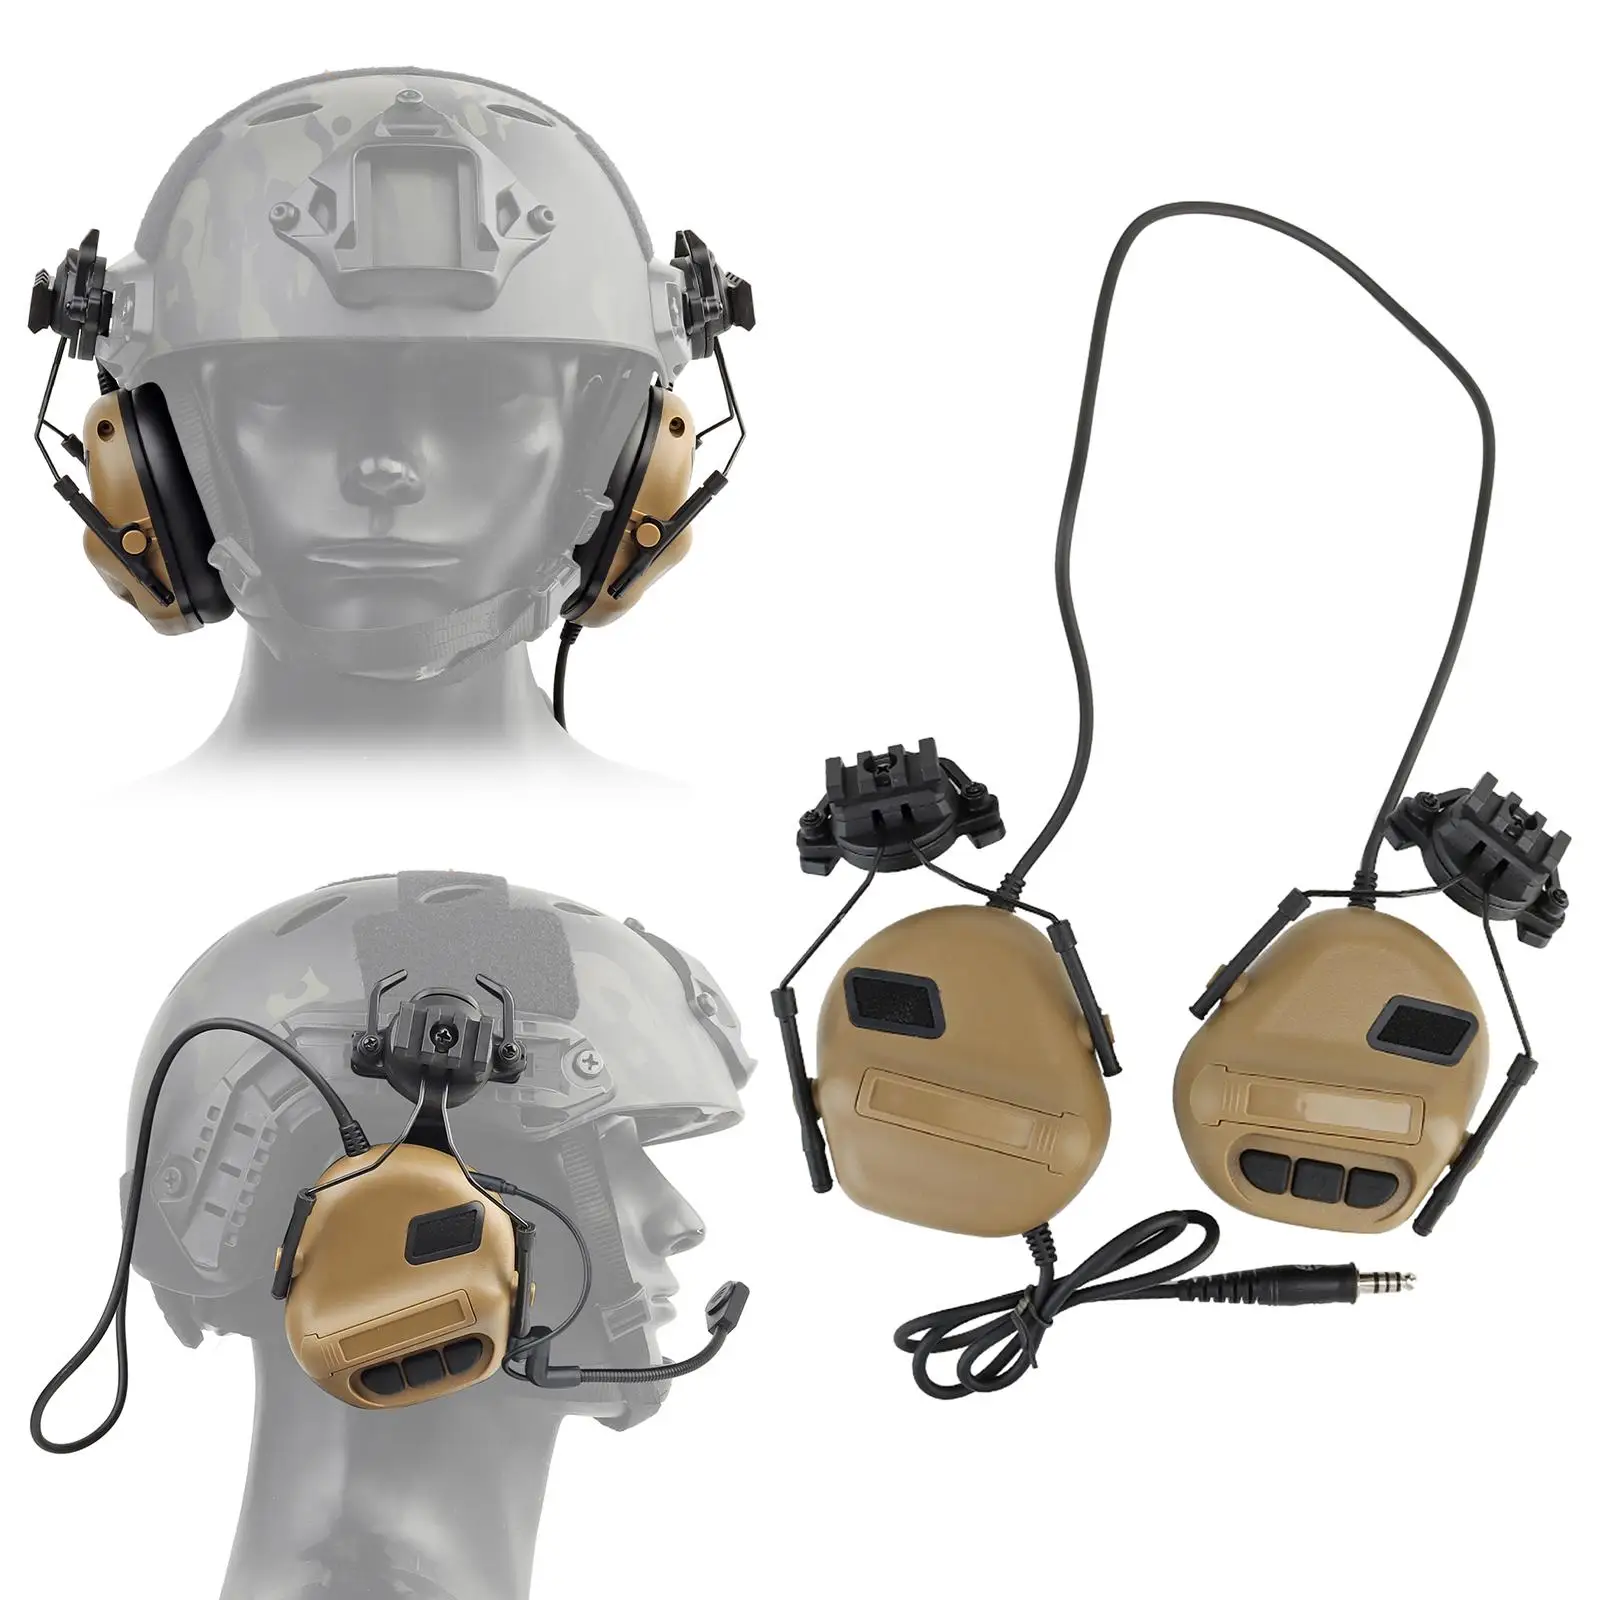 Electronic Ear Muffs Nrr 21dB Anti Noise Hearing Protection Snr 27dB Ear Defender for Team Activities Construction Mowing